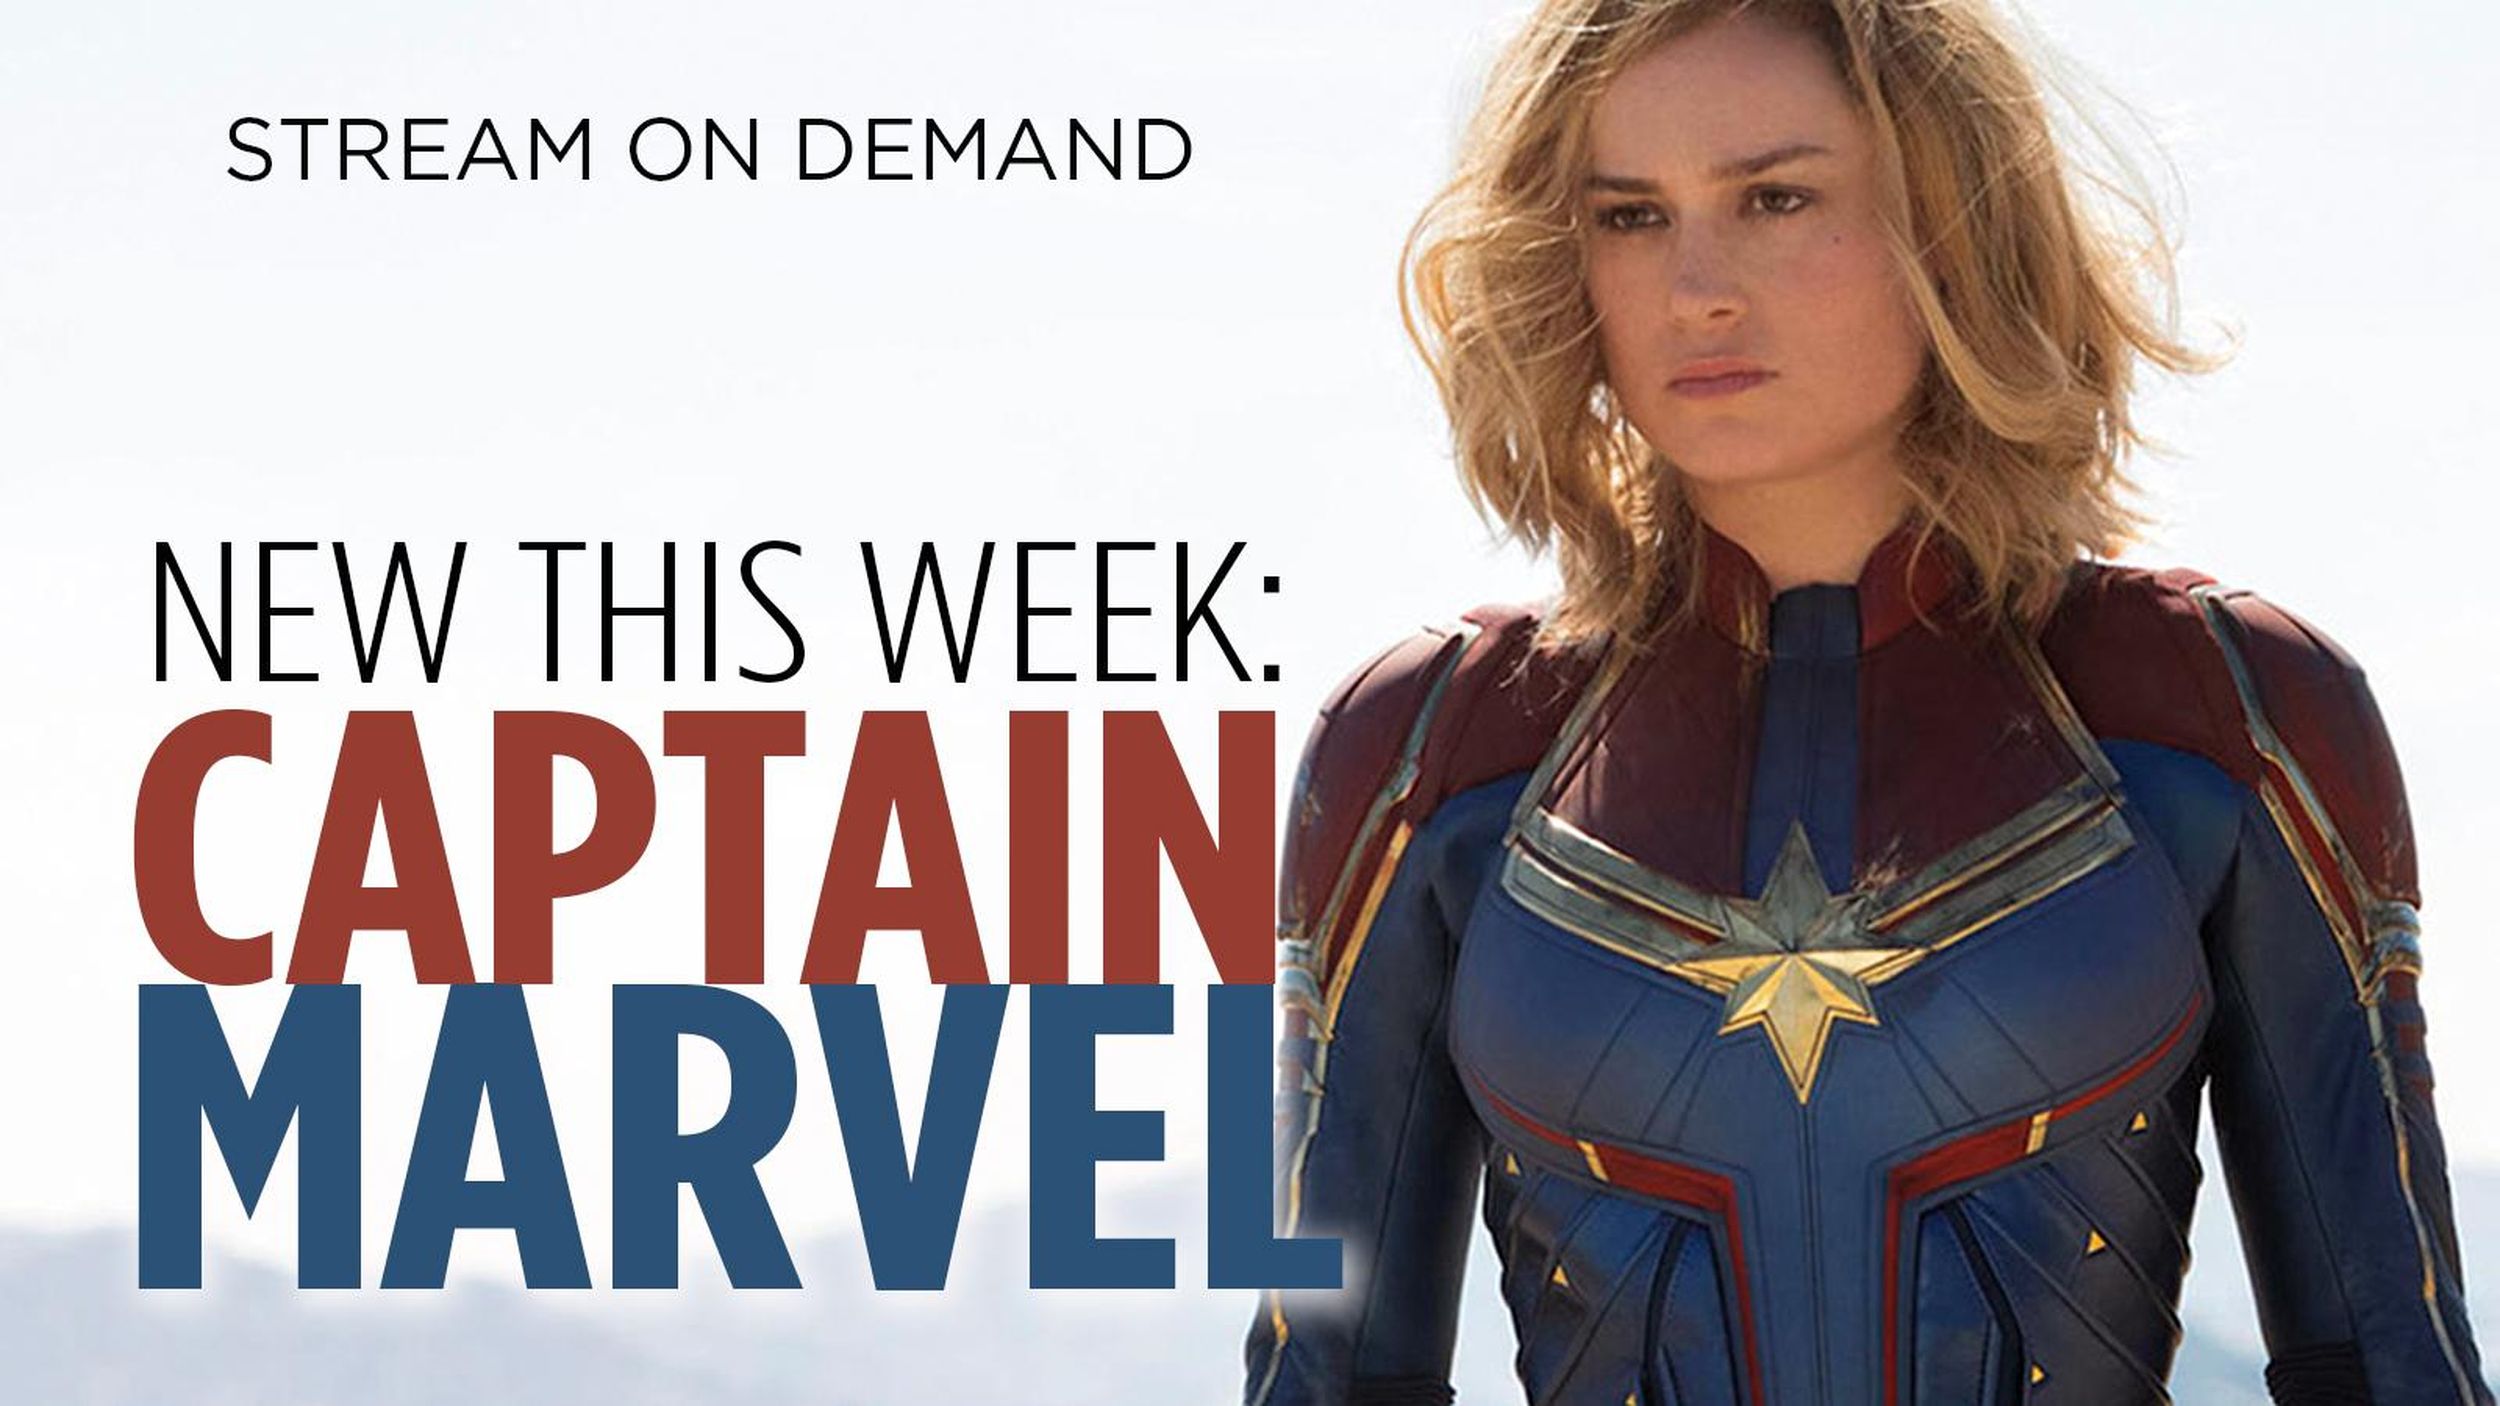 Stream On Demand Captain Marvel Makes Waves And Ralph Wrecks The Internet The Spokesman Review